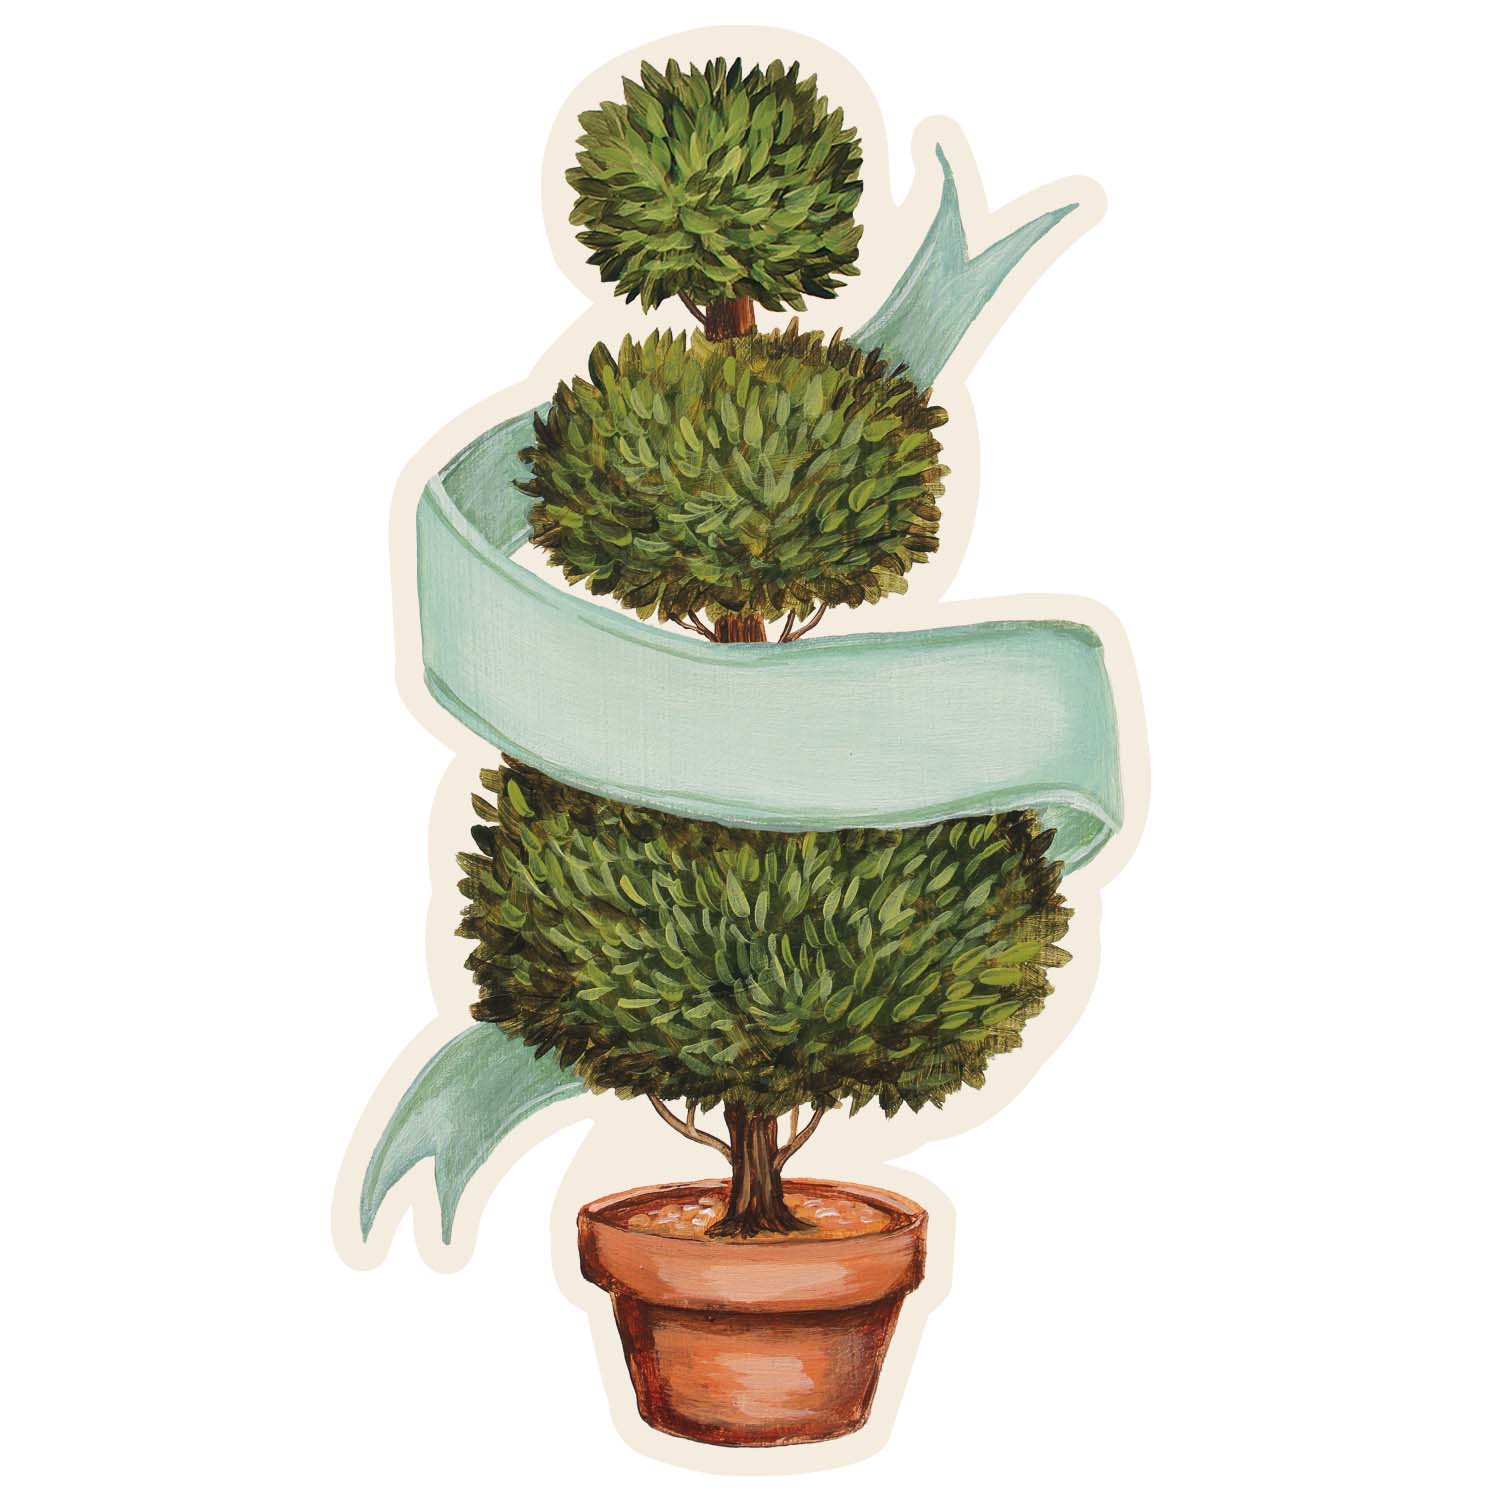 A die-cut illustration of a potted shrub manicured into three balls, with a blank seafoam ribbon twisting around the topiary, creating a space for personalization.